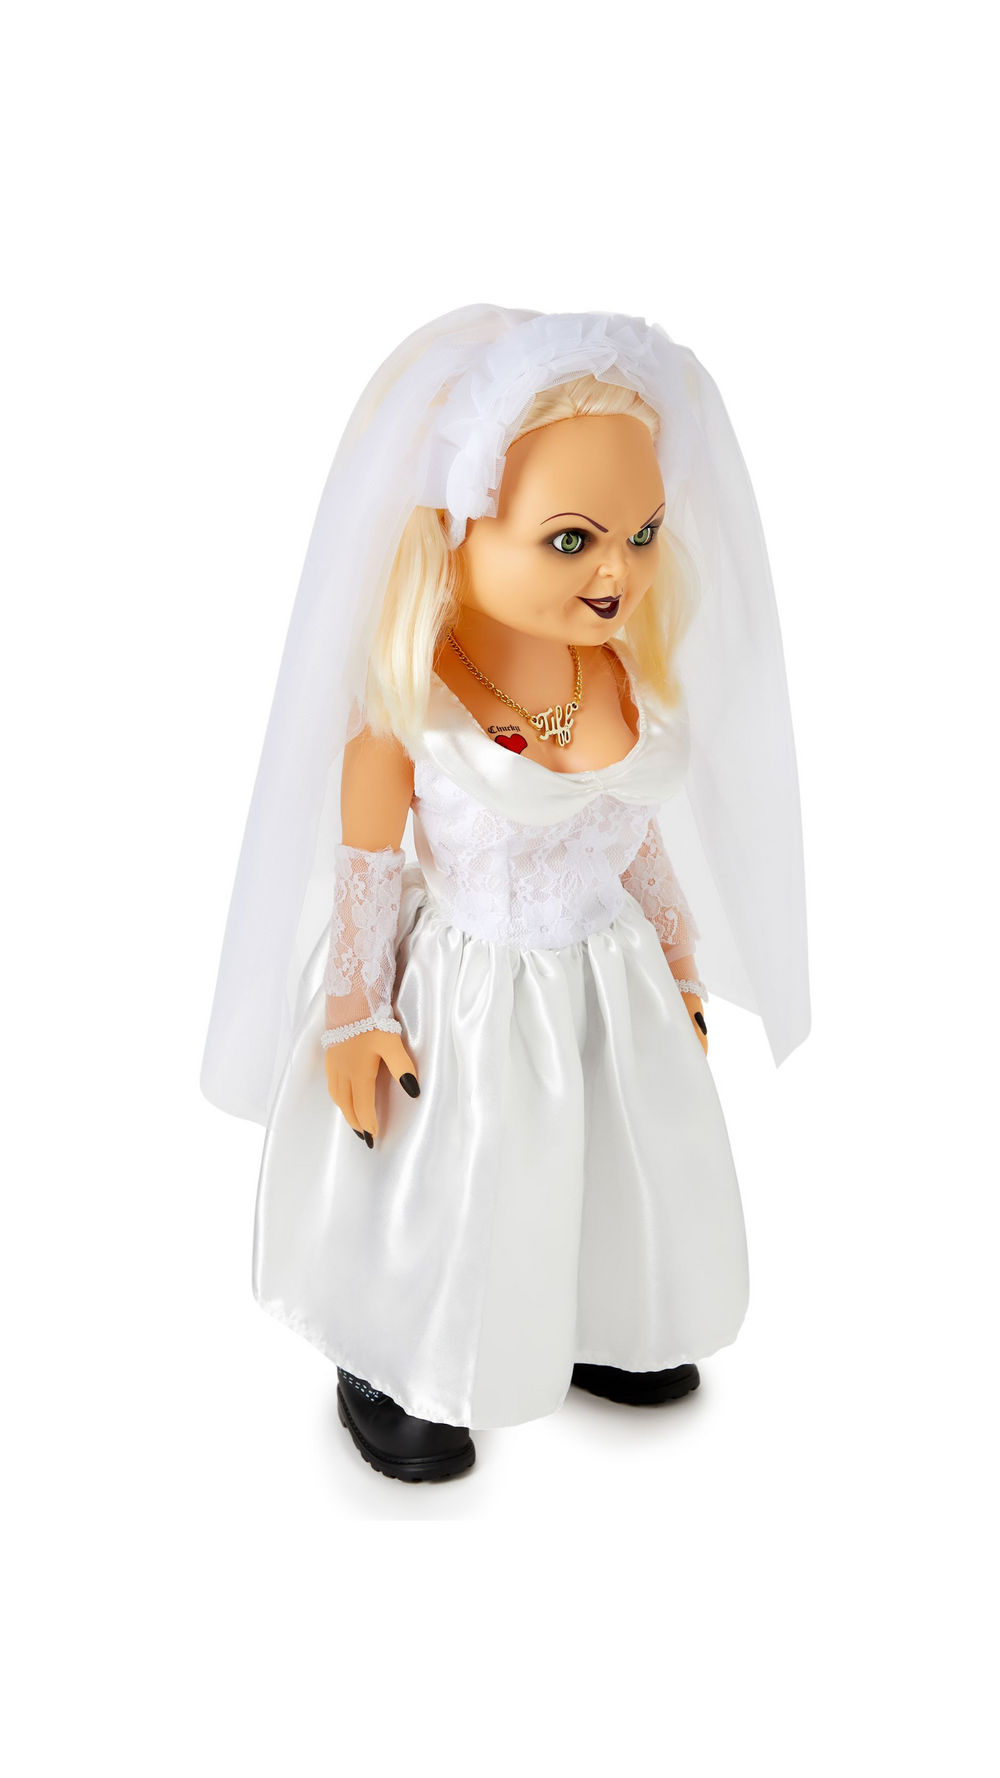 Bride of Chucky Collectible 2021Universal Tiffany 22" Doll